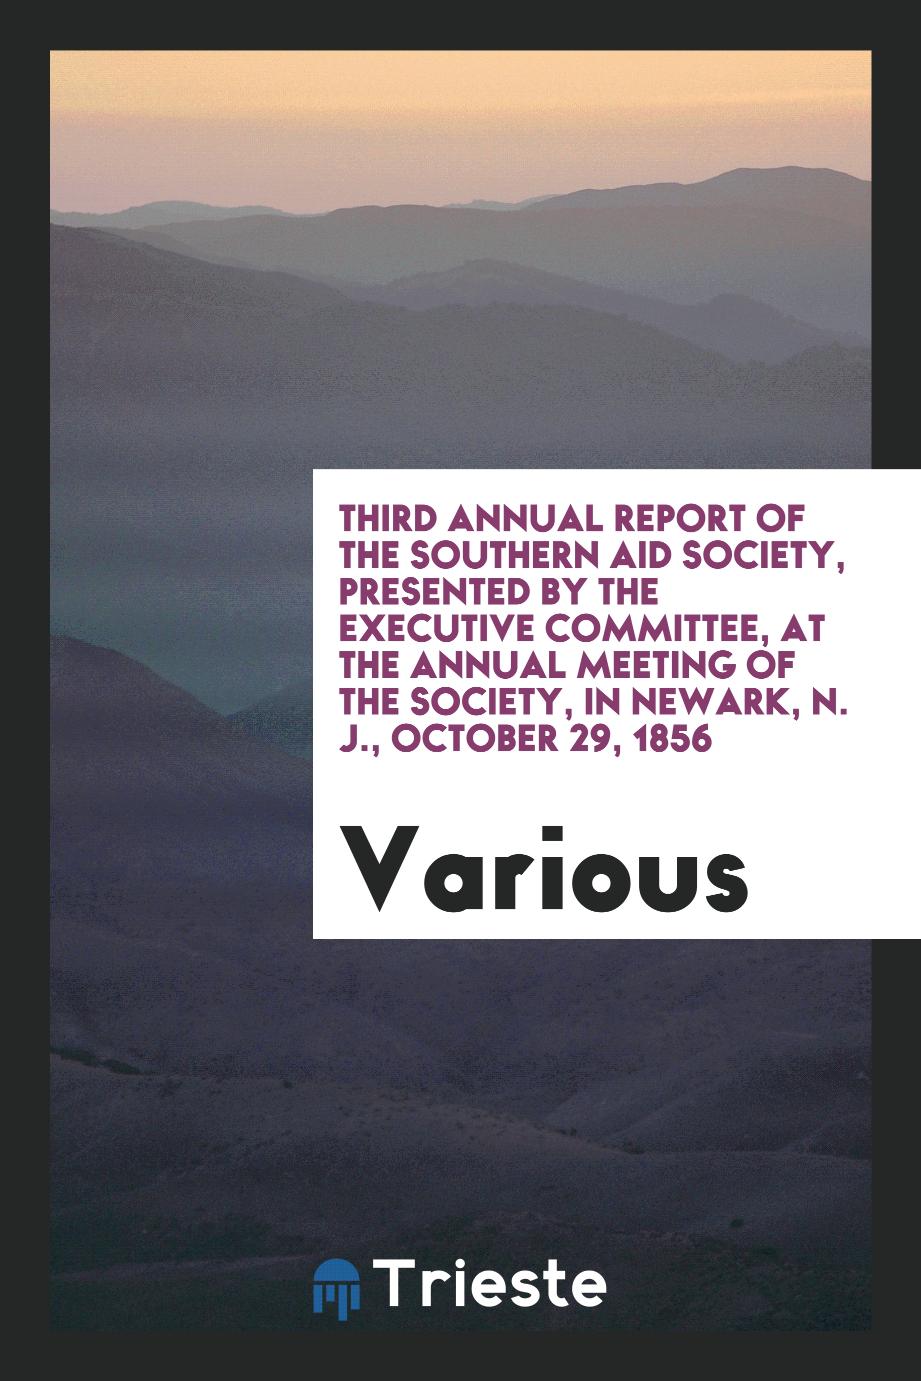 Third Annual report of the Southern Aid Society, presented by the Executive Committee, at the annual meeting of the Society, in Newark, N. J., October 29, 1856